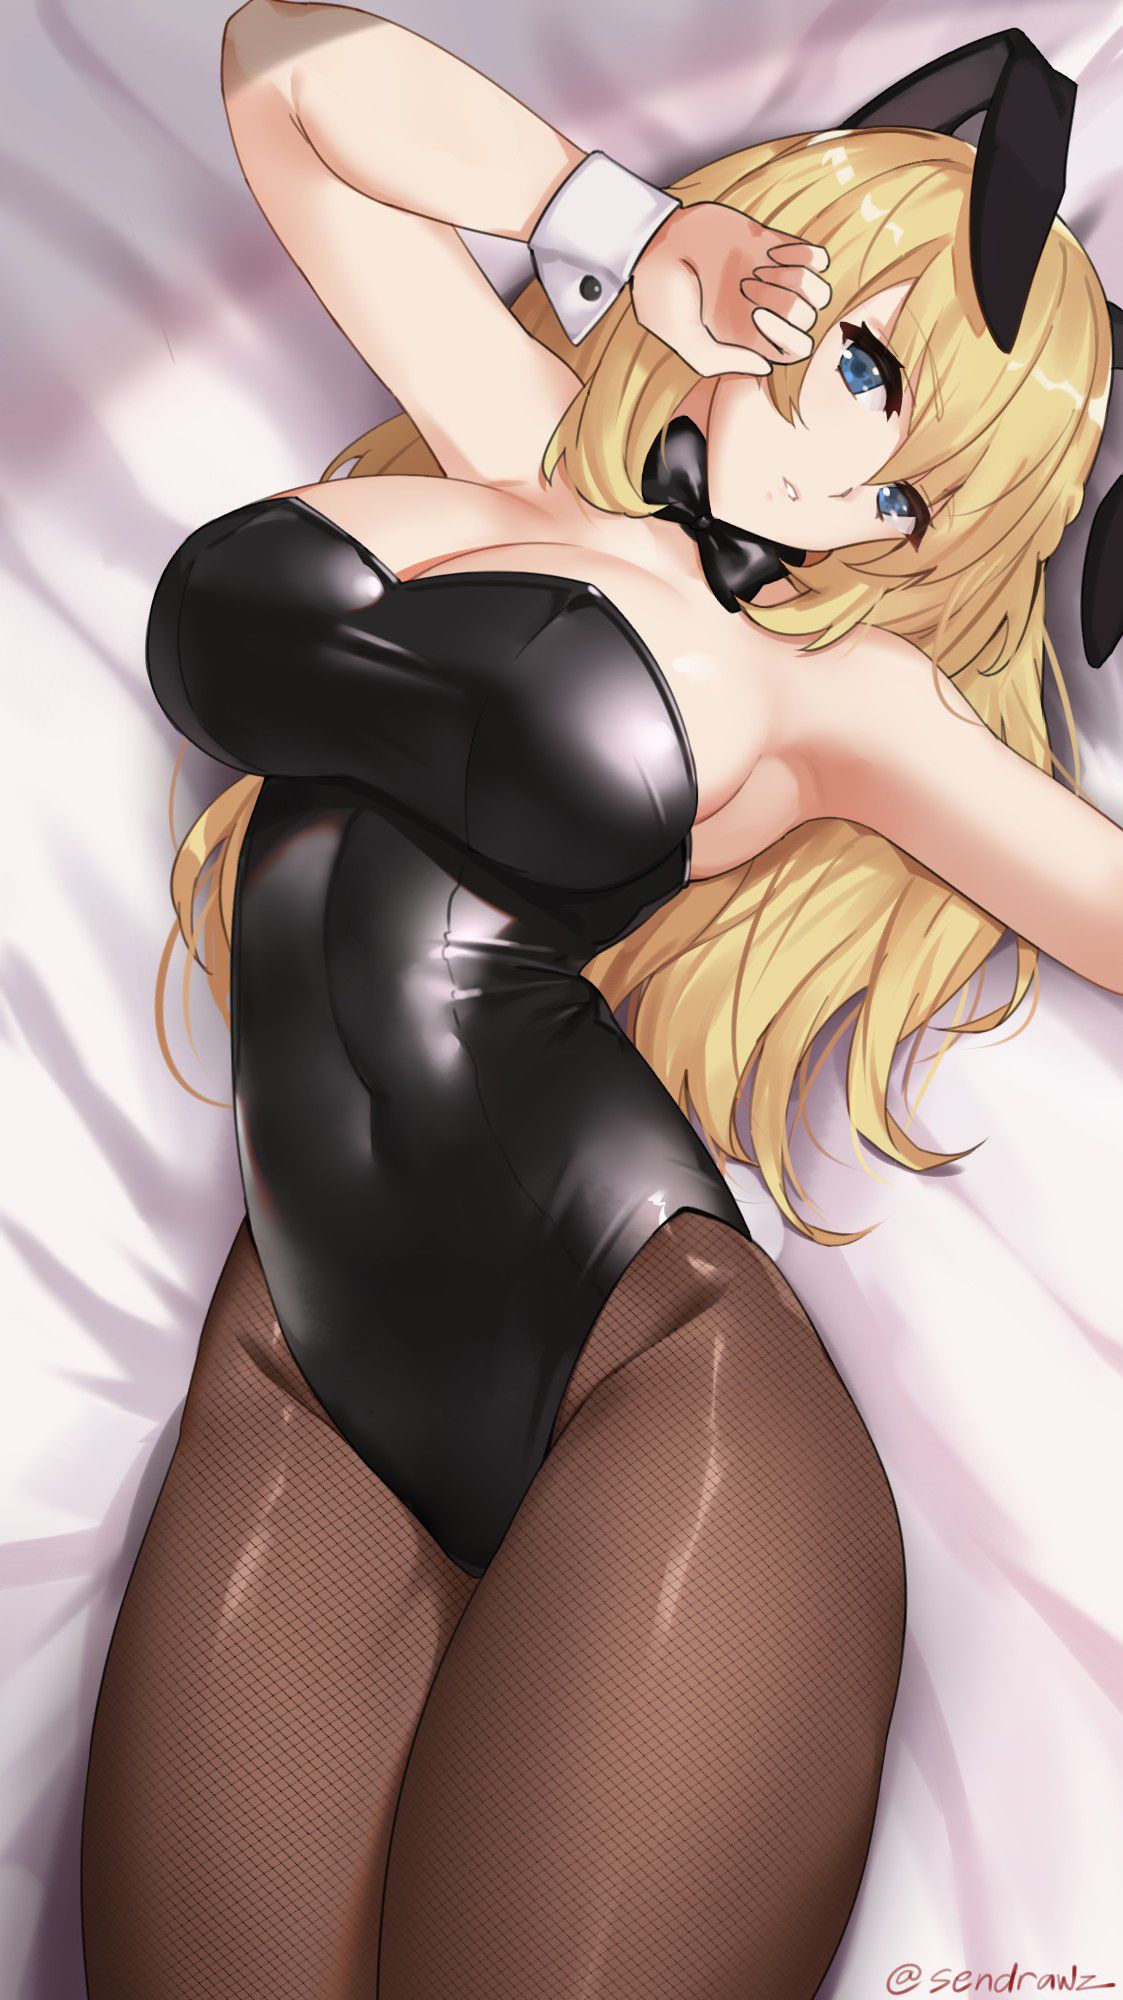 [Secondary] erotic image of a girl in bunny girl figure 30